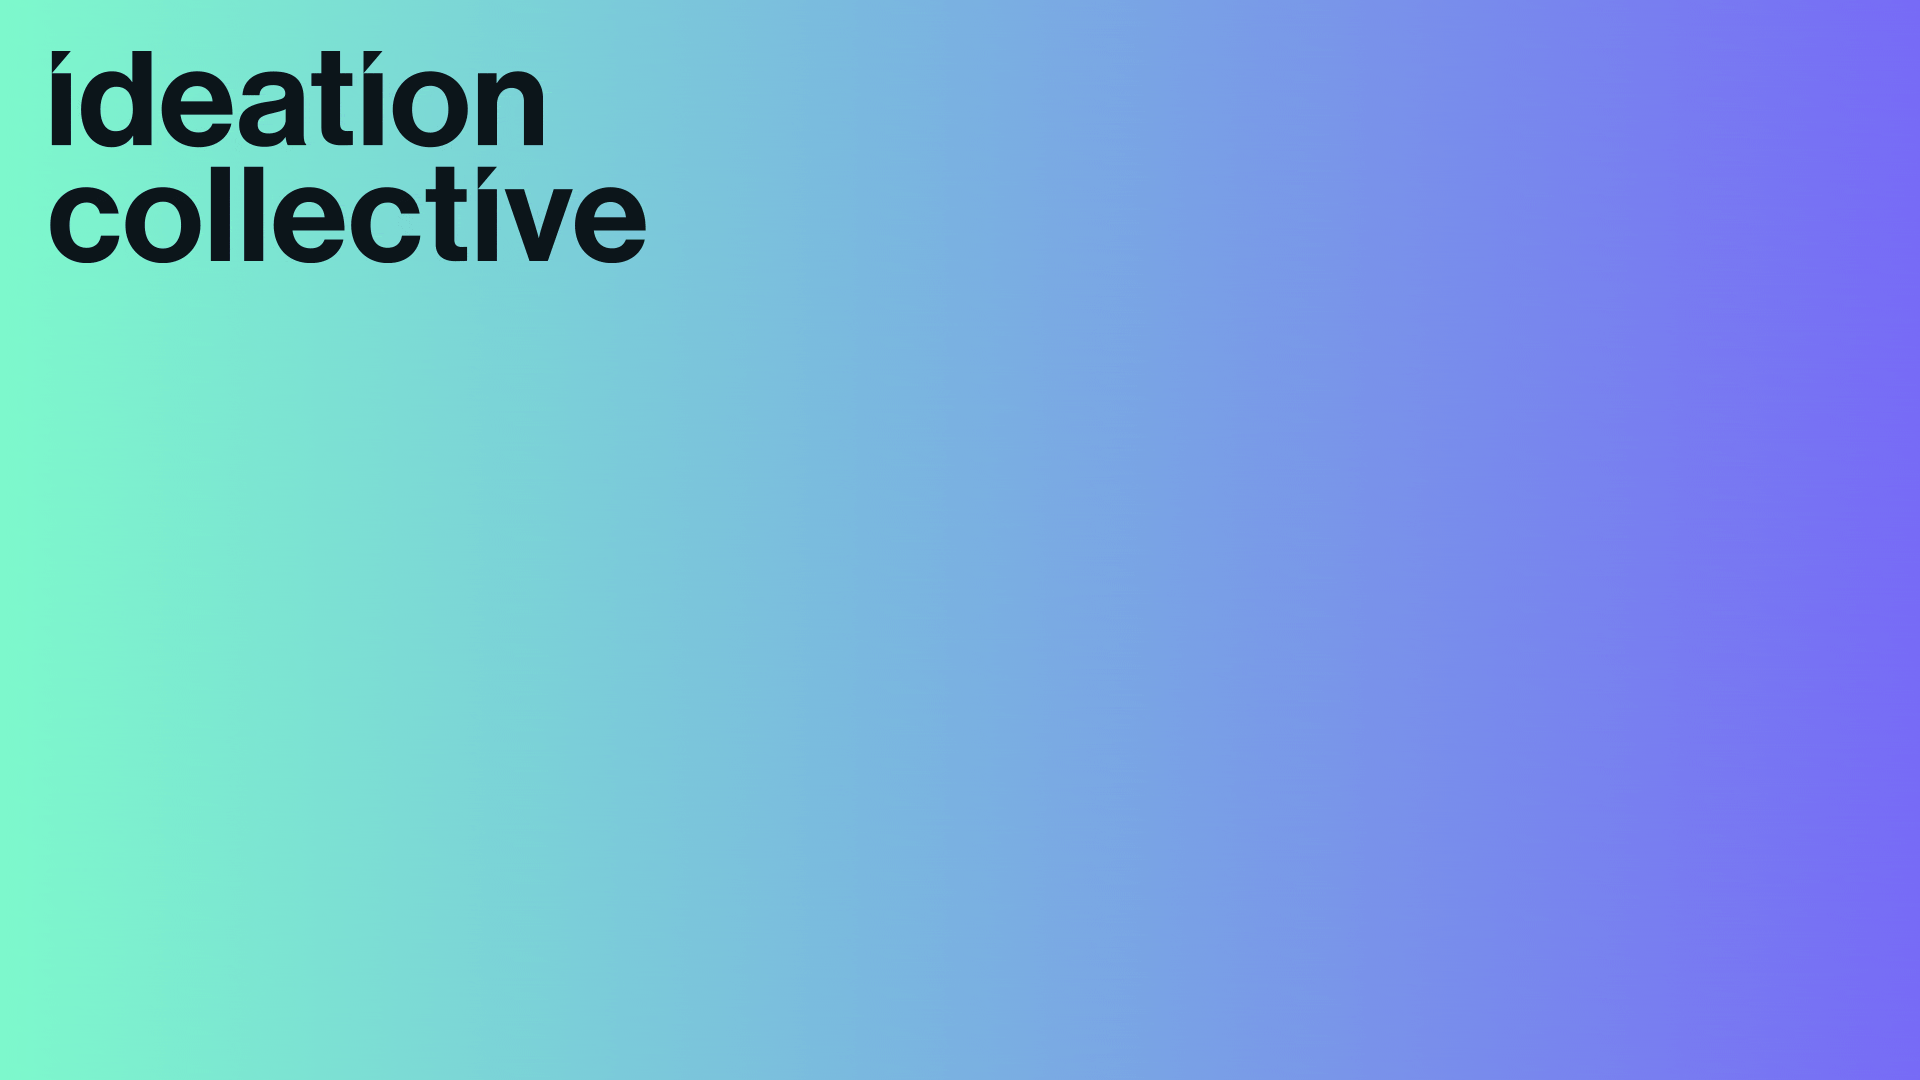 Ideation Collective